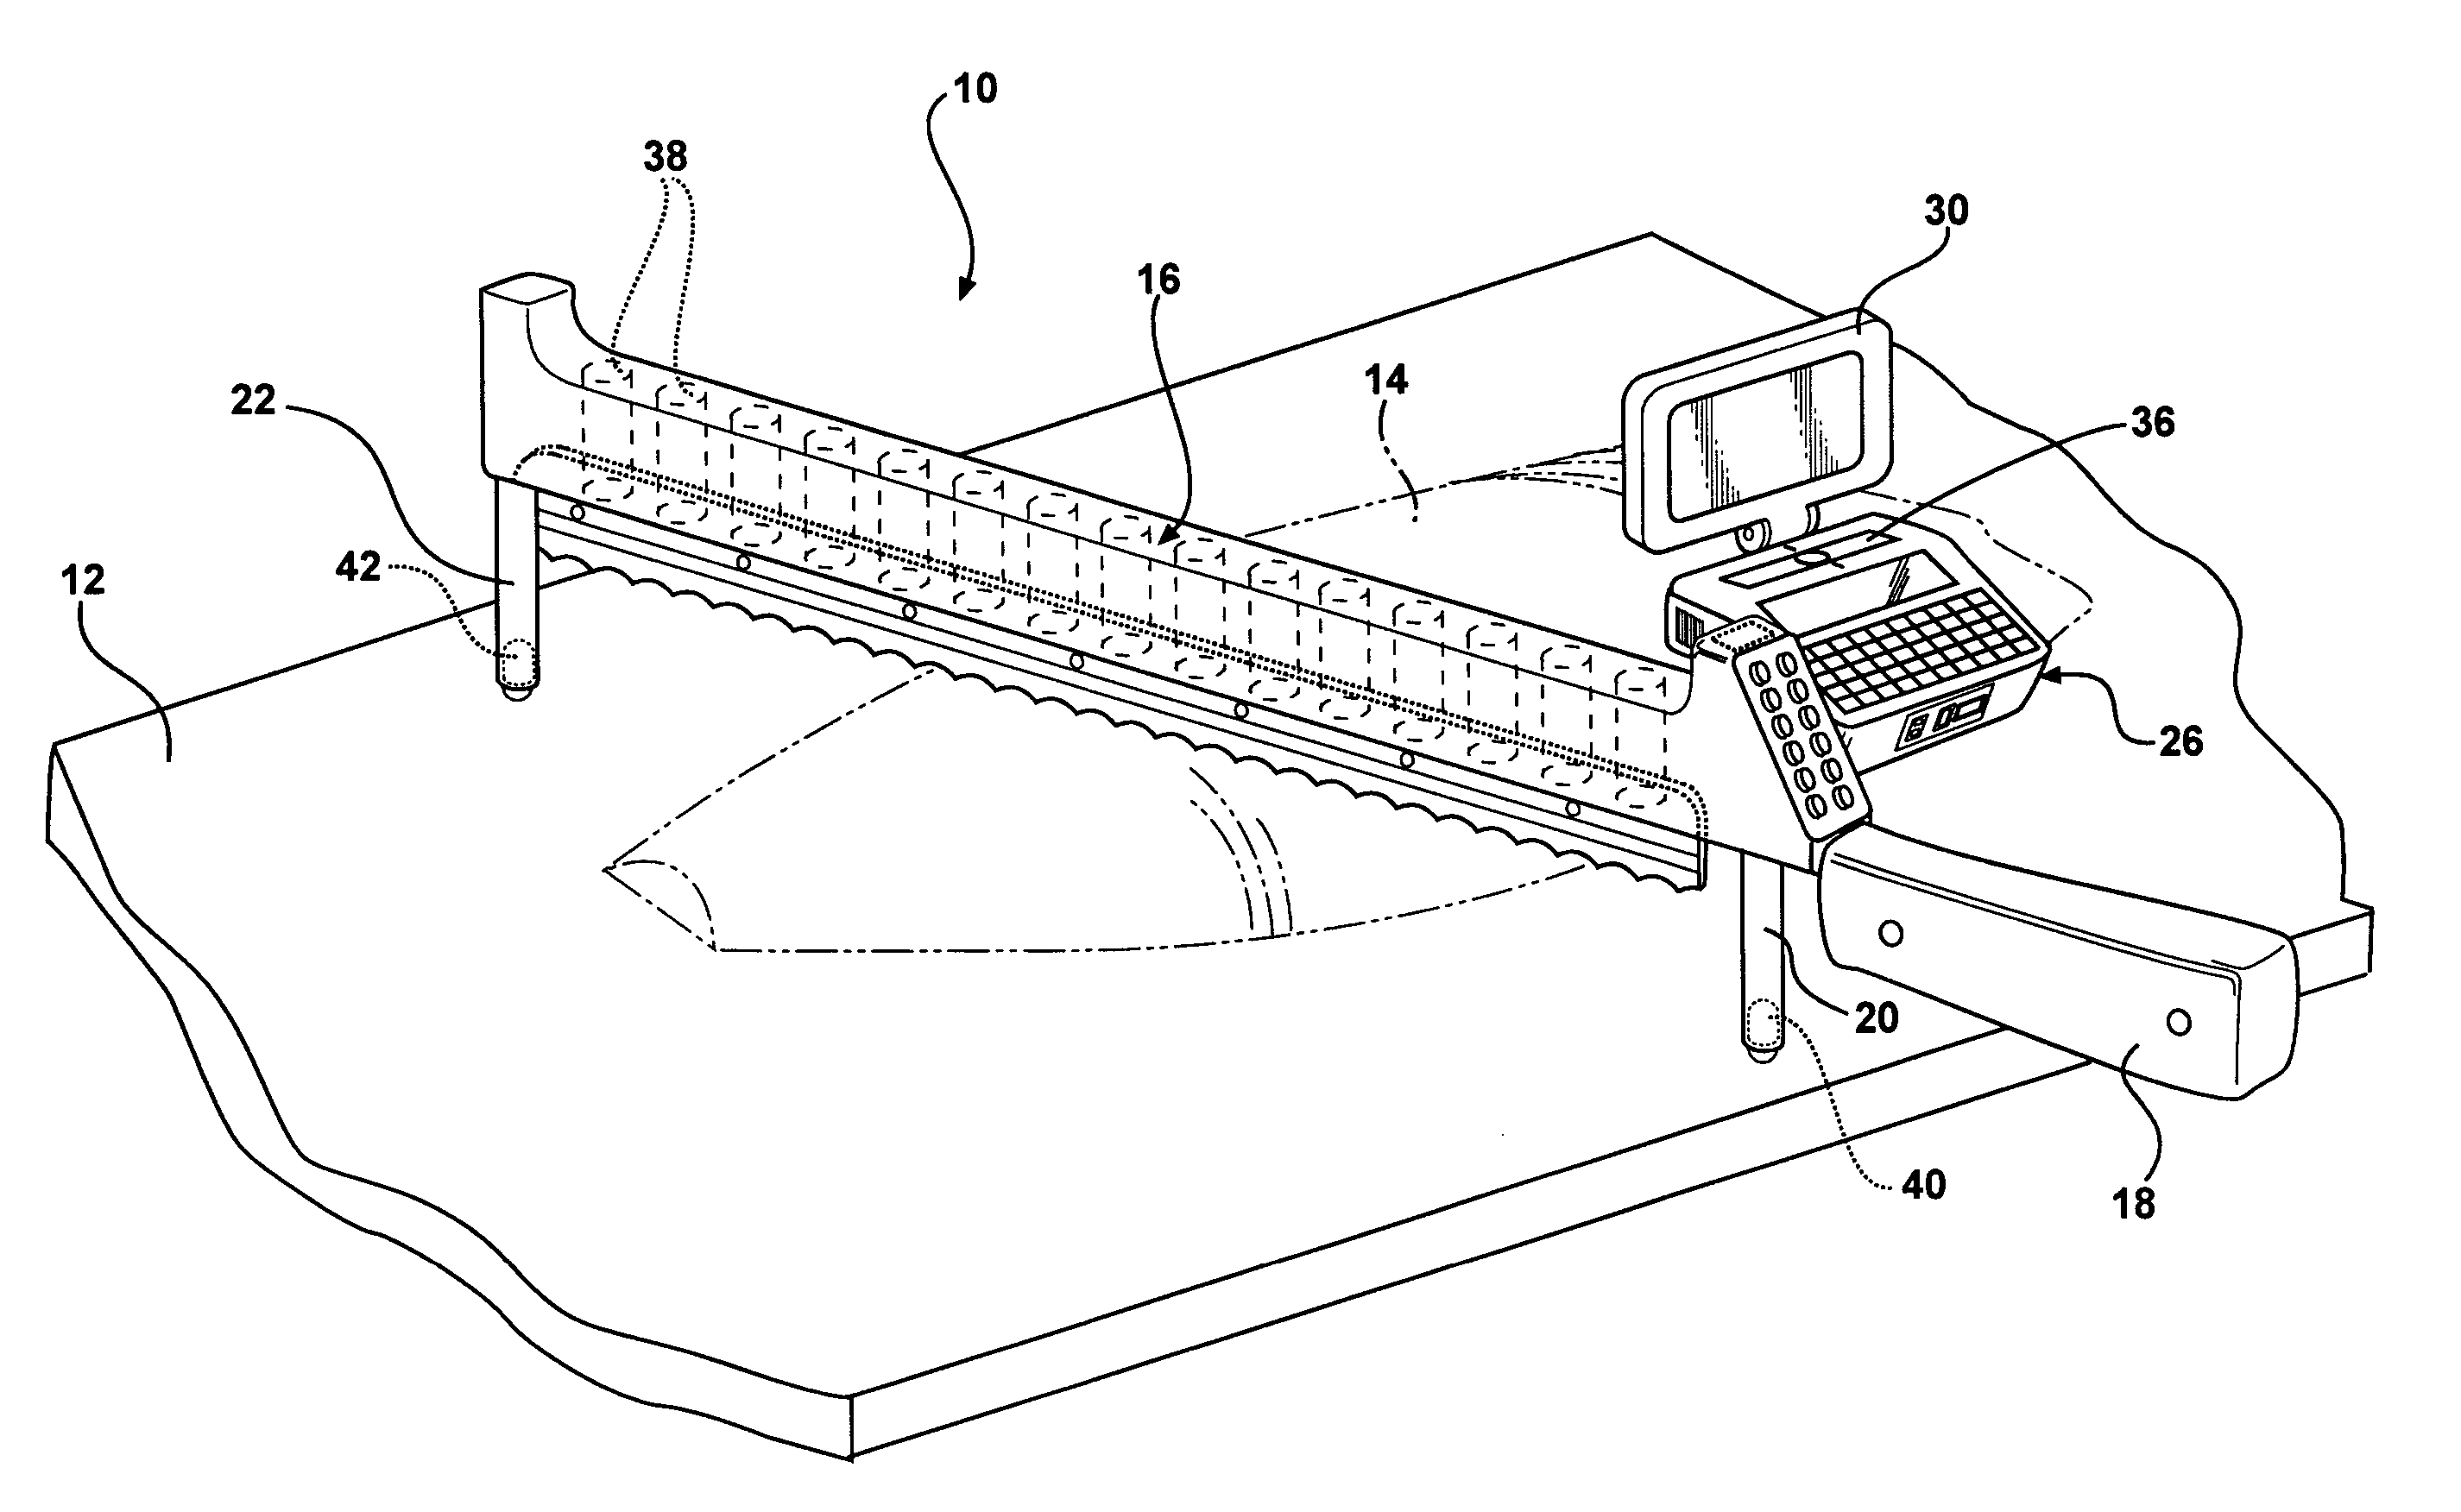 Apparatus and method for producing a numeric display corresponding to the volume of a selected segment of an item